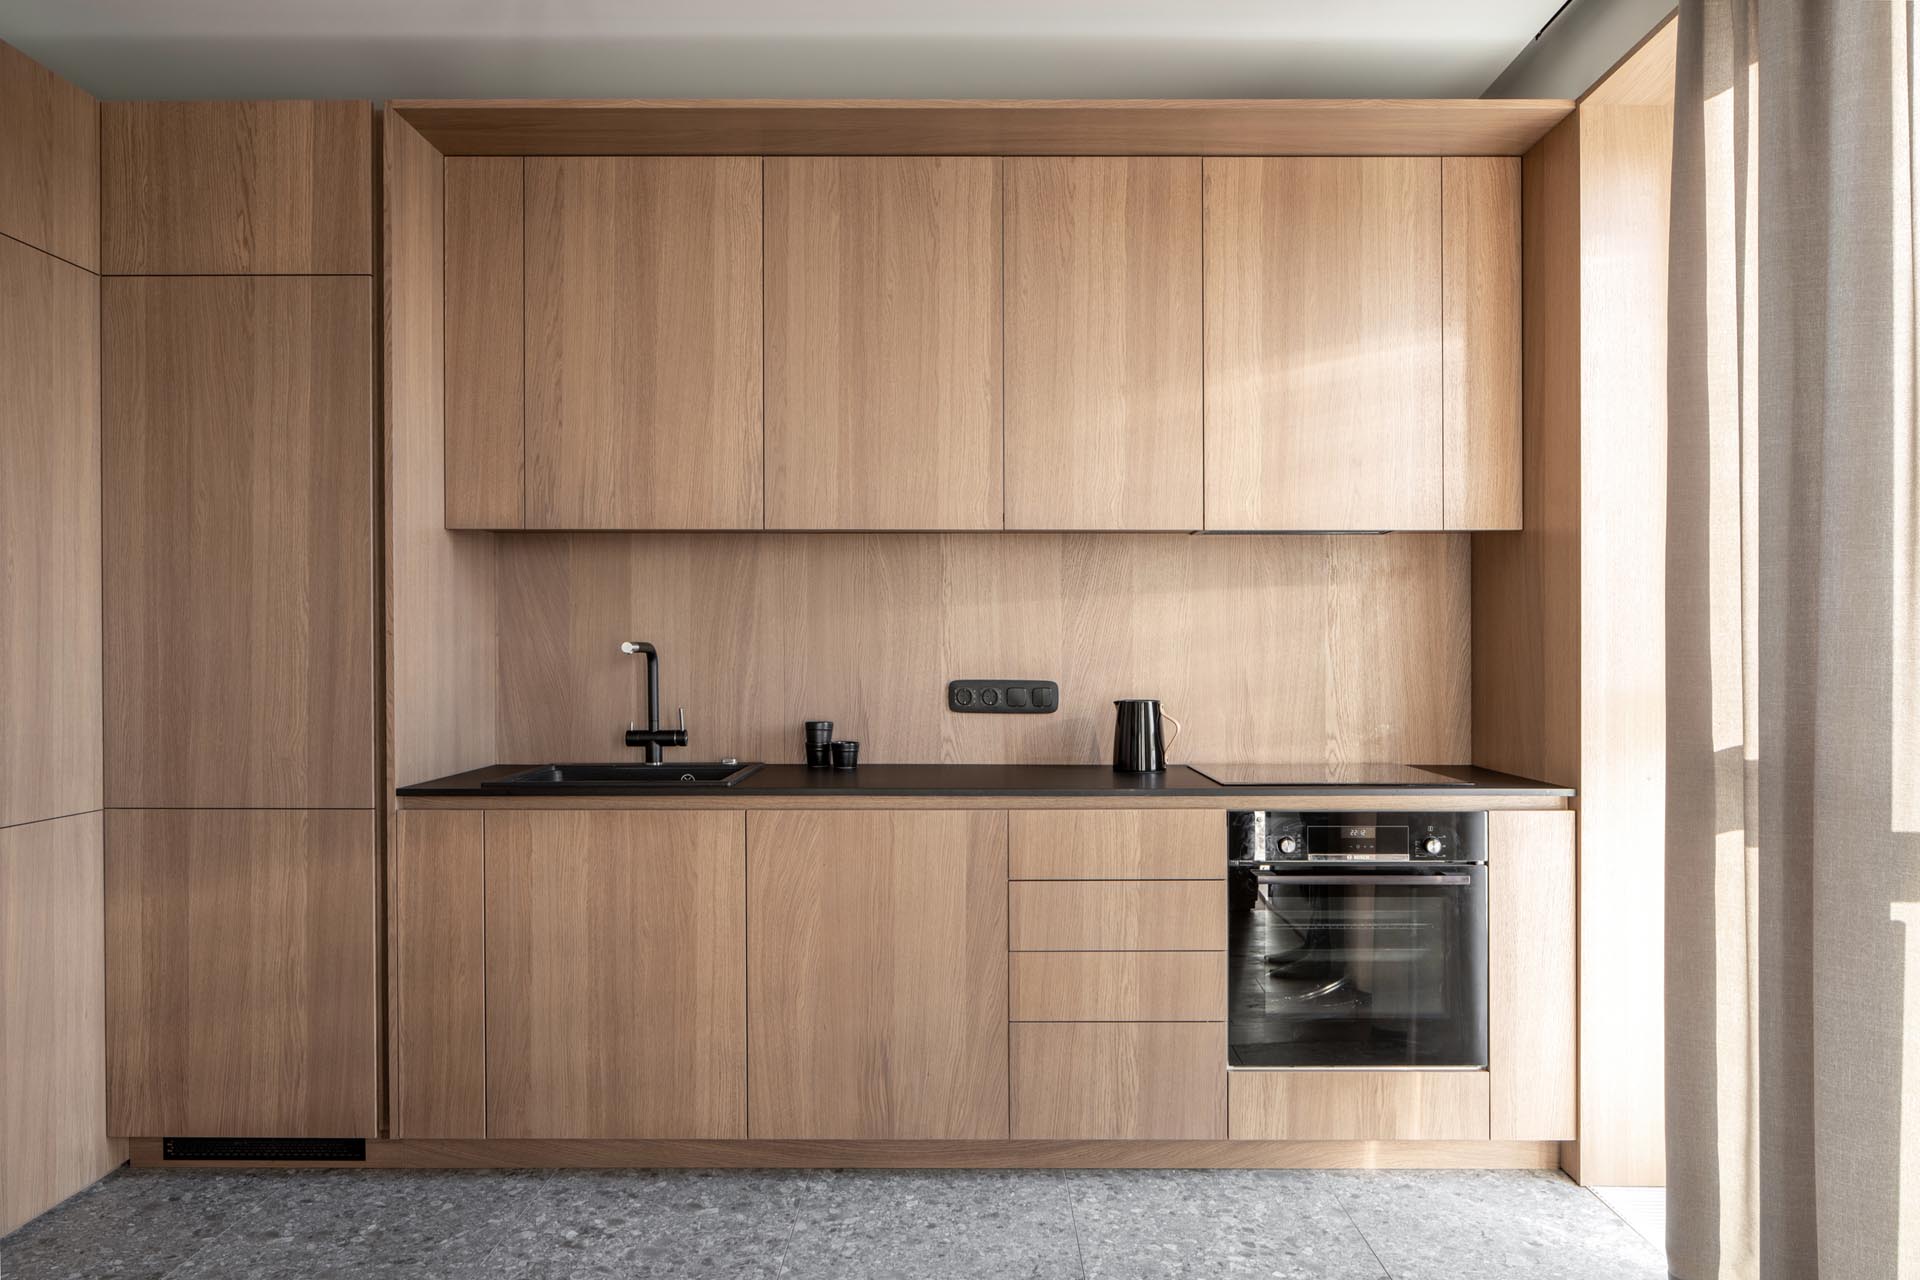 A modern wood kitchen with hardware-free cabinets, and an integrated fridge and dishwasher.